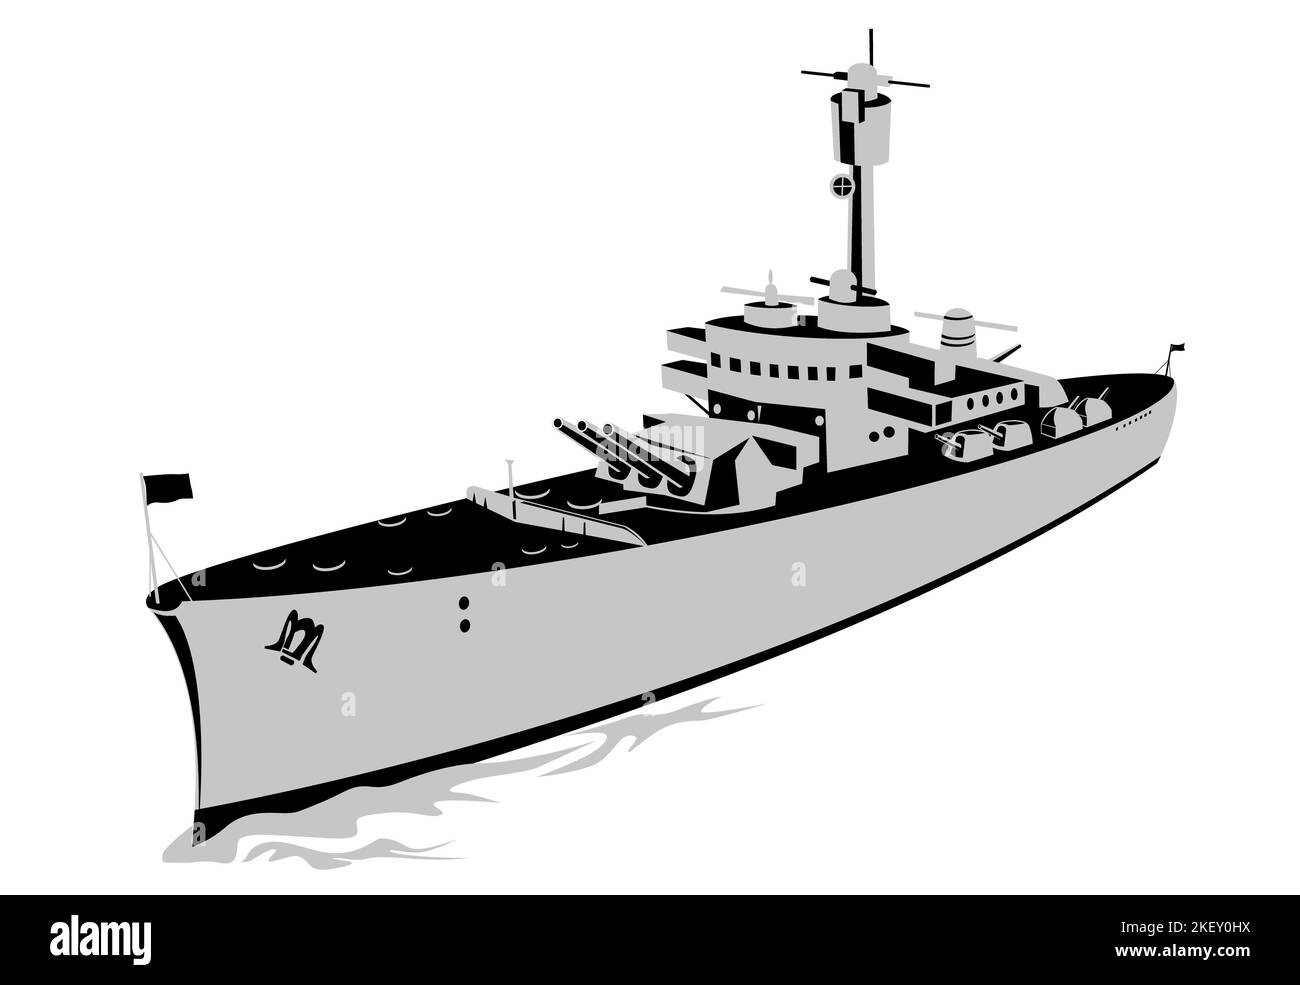 Illustration of a World War Two torpedo boat destroyer, Fletcher class or tin can at sea viewed from high angle aerial view on isolated background don Stock Photo